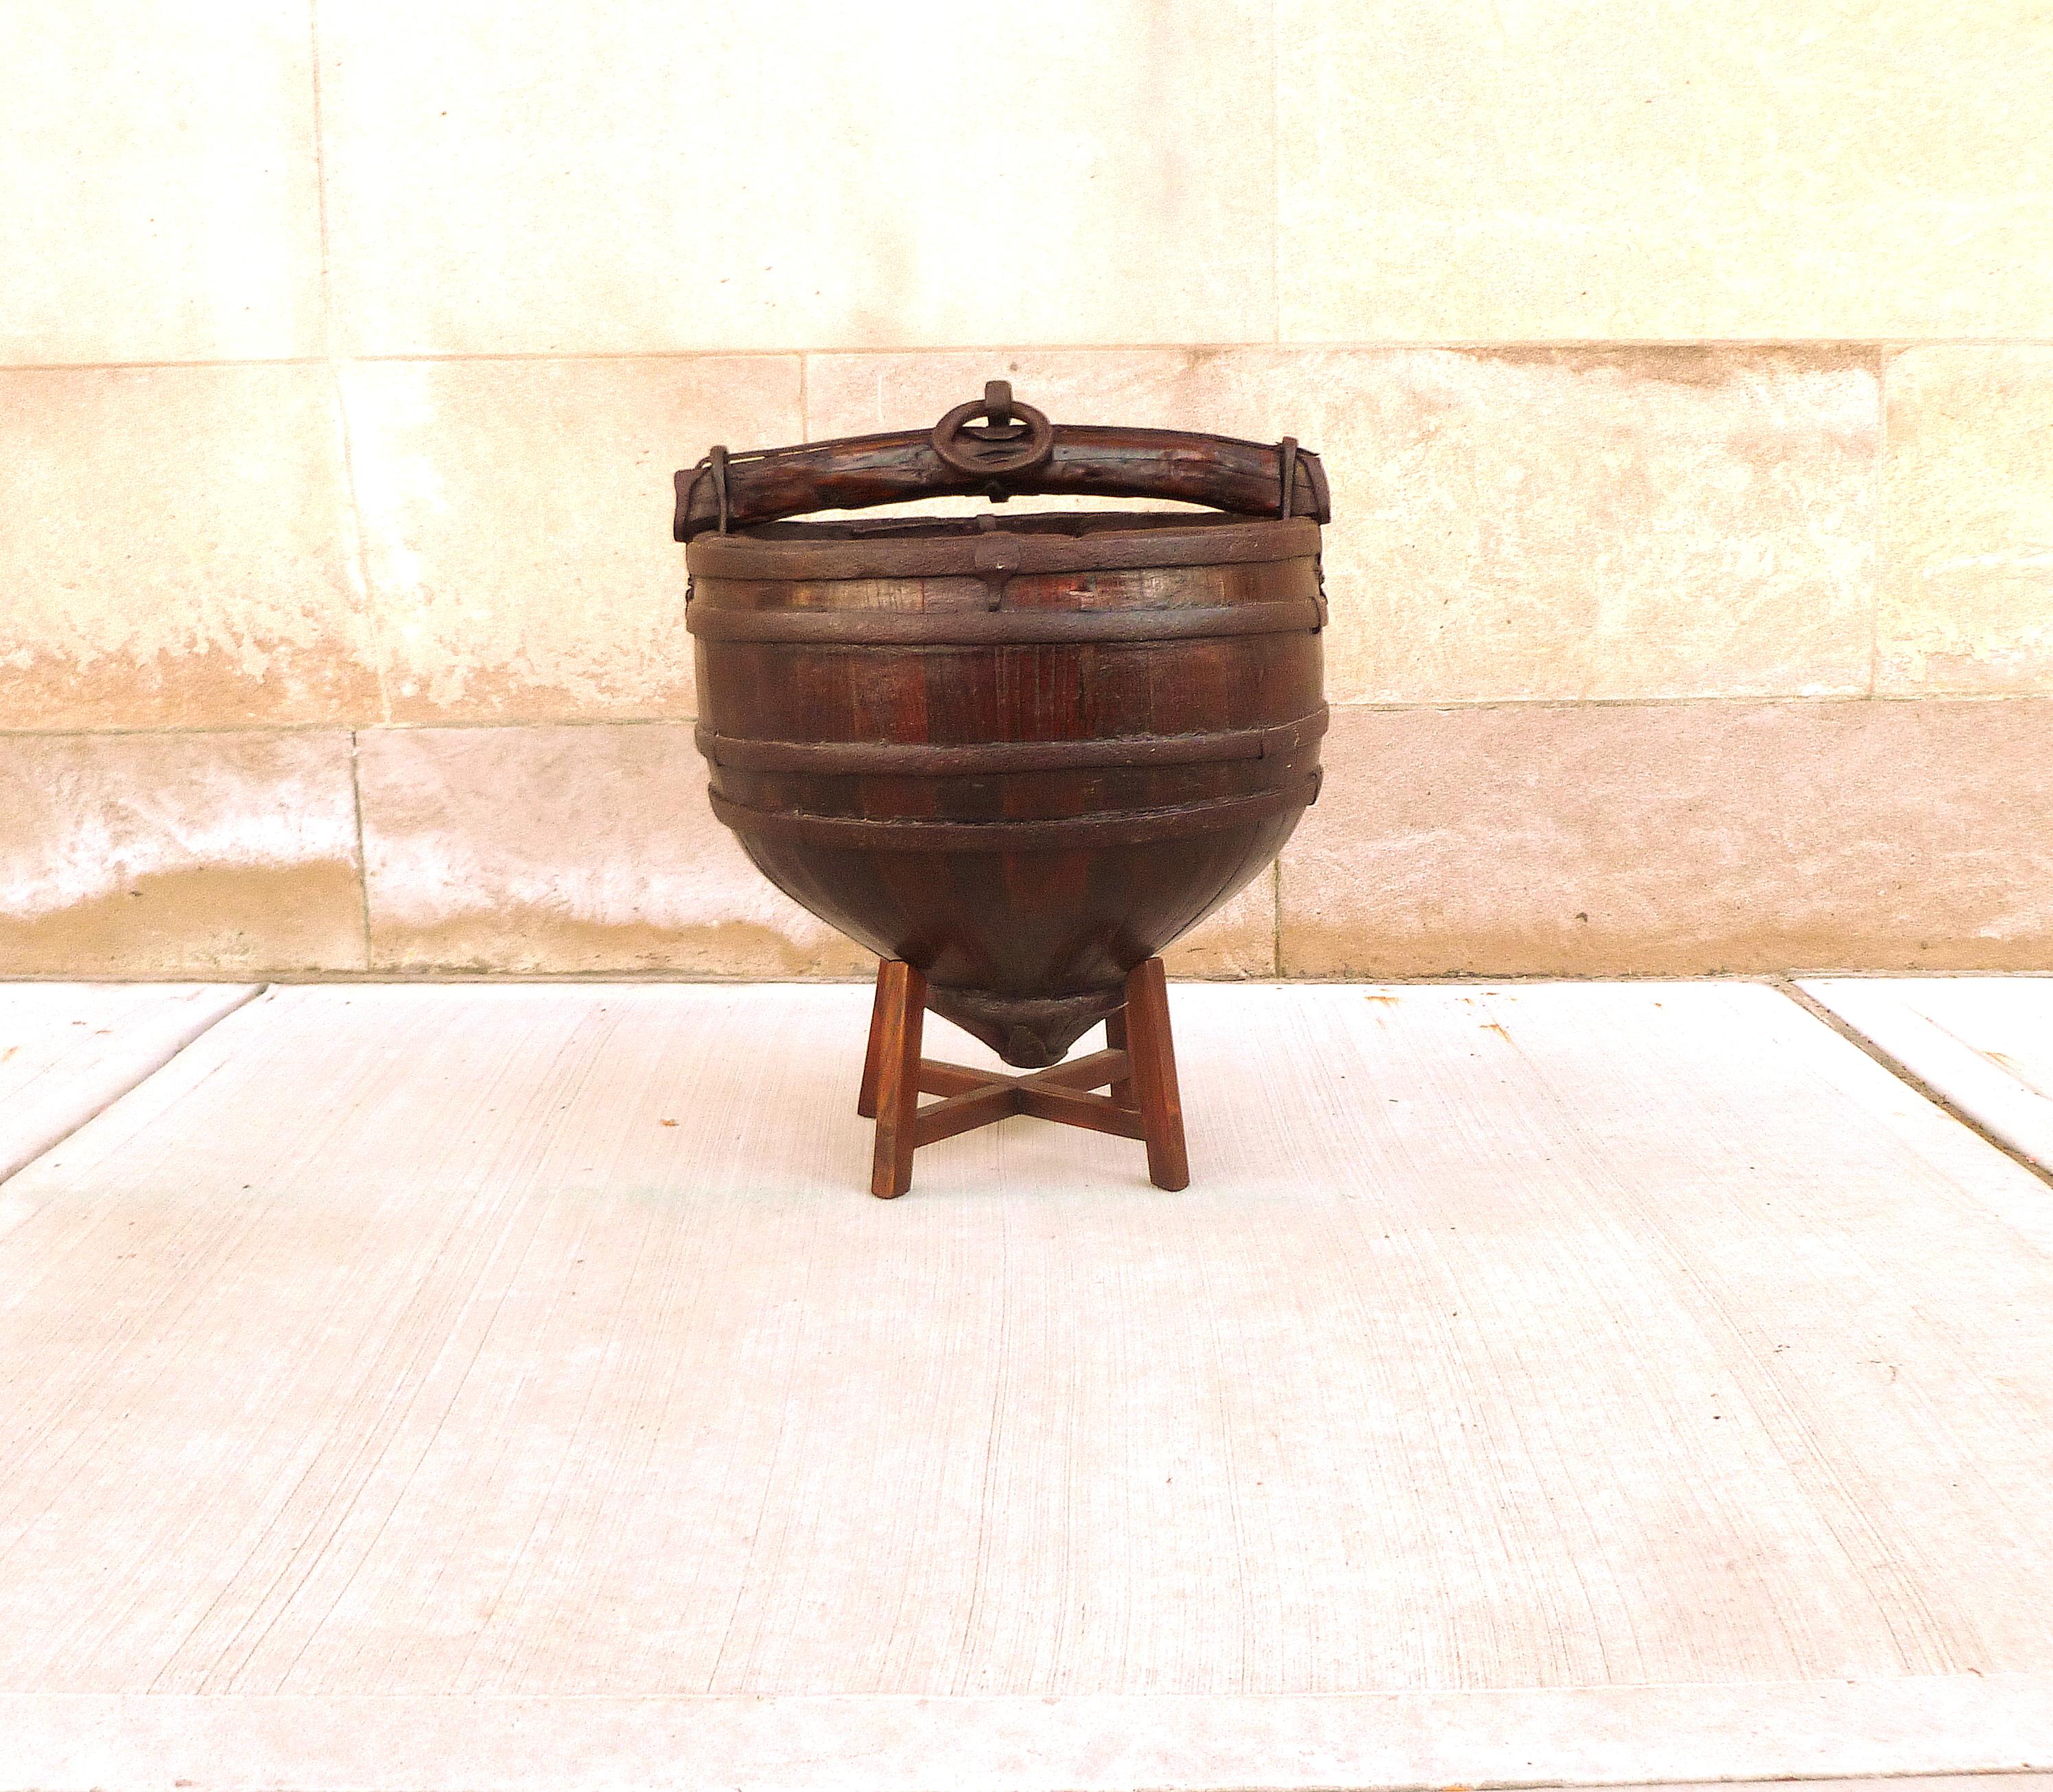 Asian well's water wooden water bucket with handle surrounded with cast iron brackets. We carry fine quality furniture with elegant finished and has been appeared many times in 